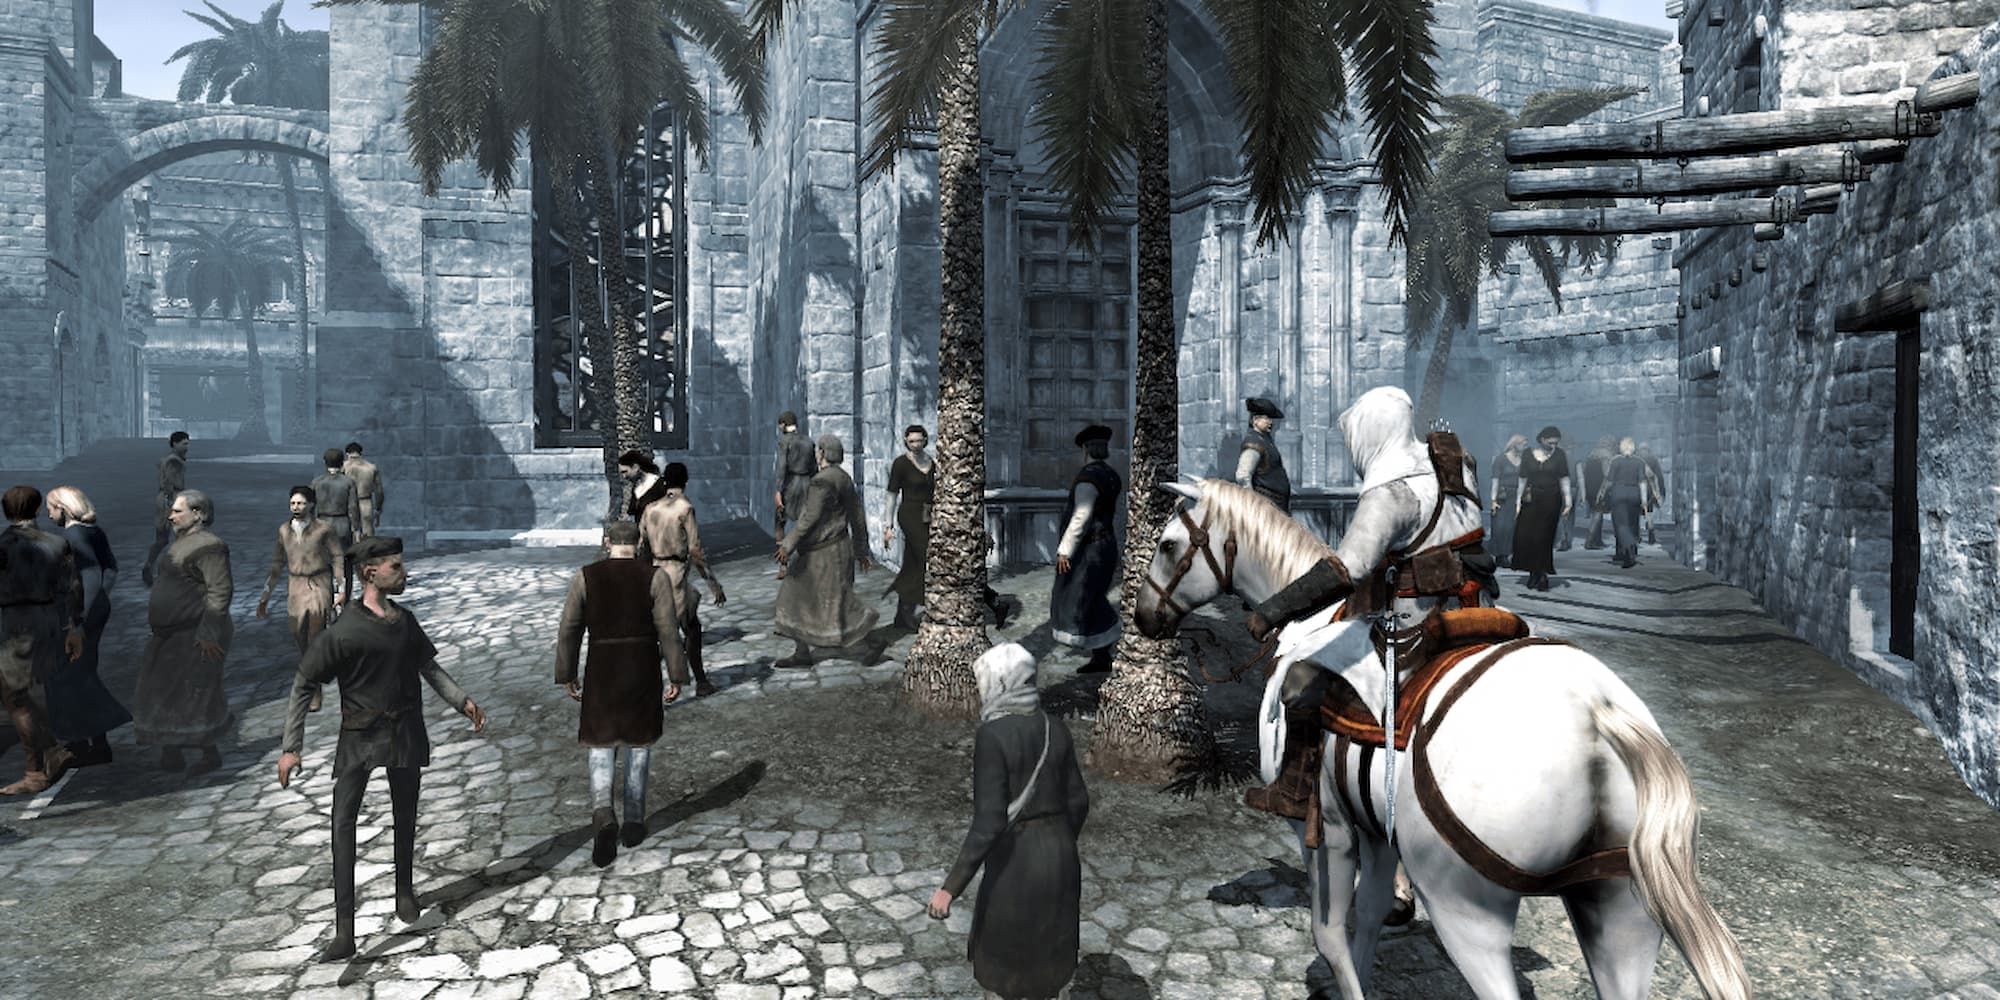 Altair rides a horse into a crowd of villagers in Assassin's Creed.